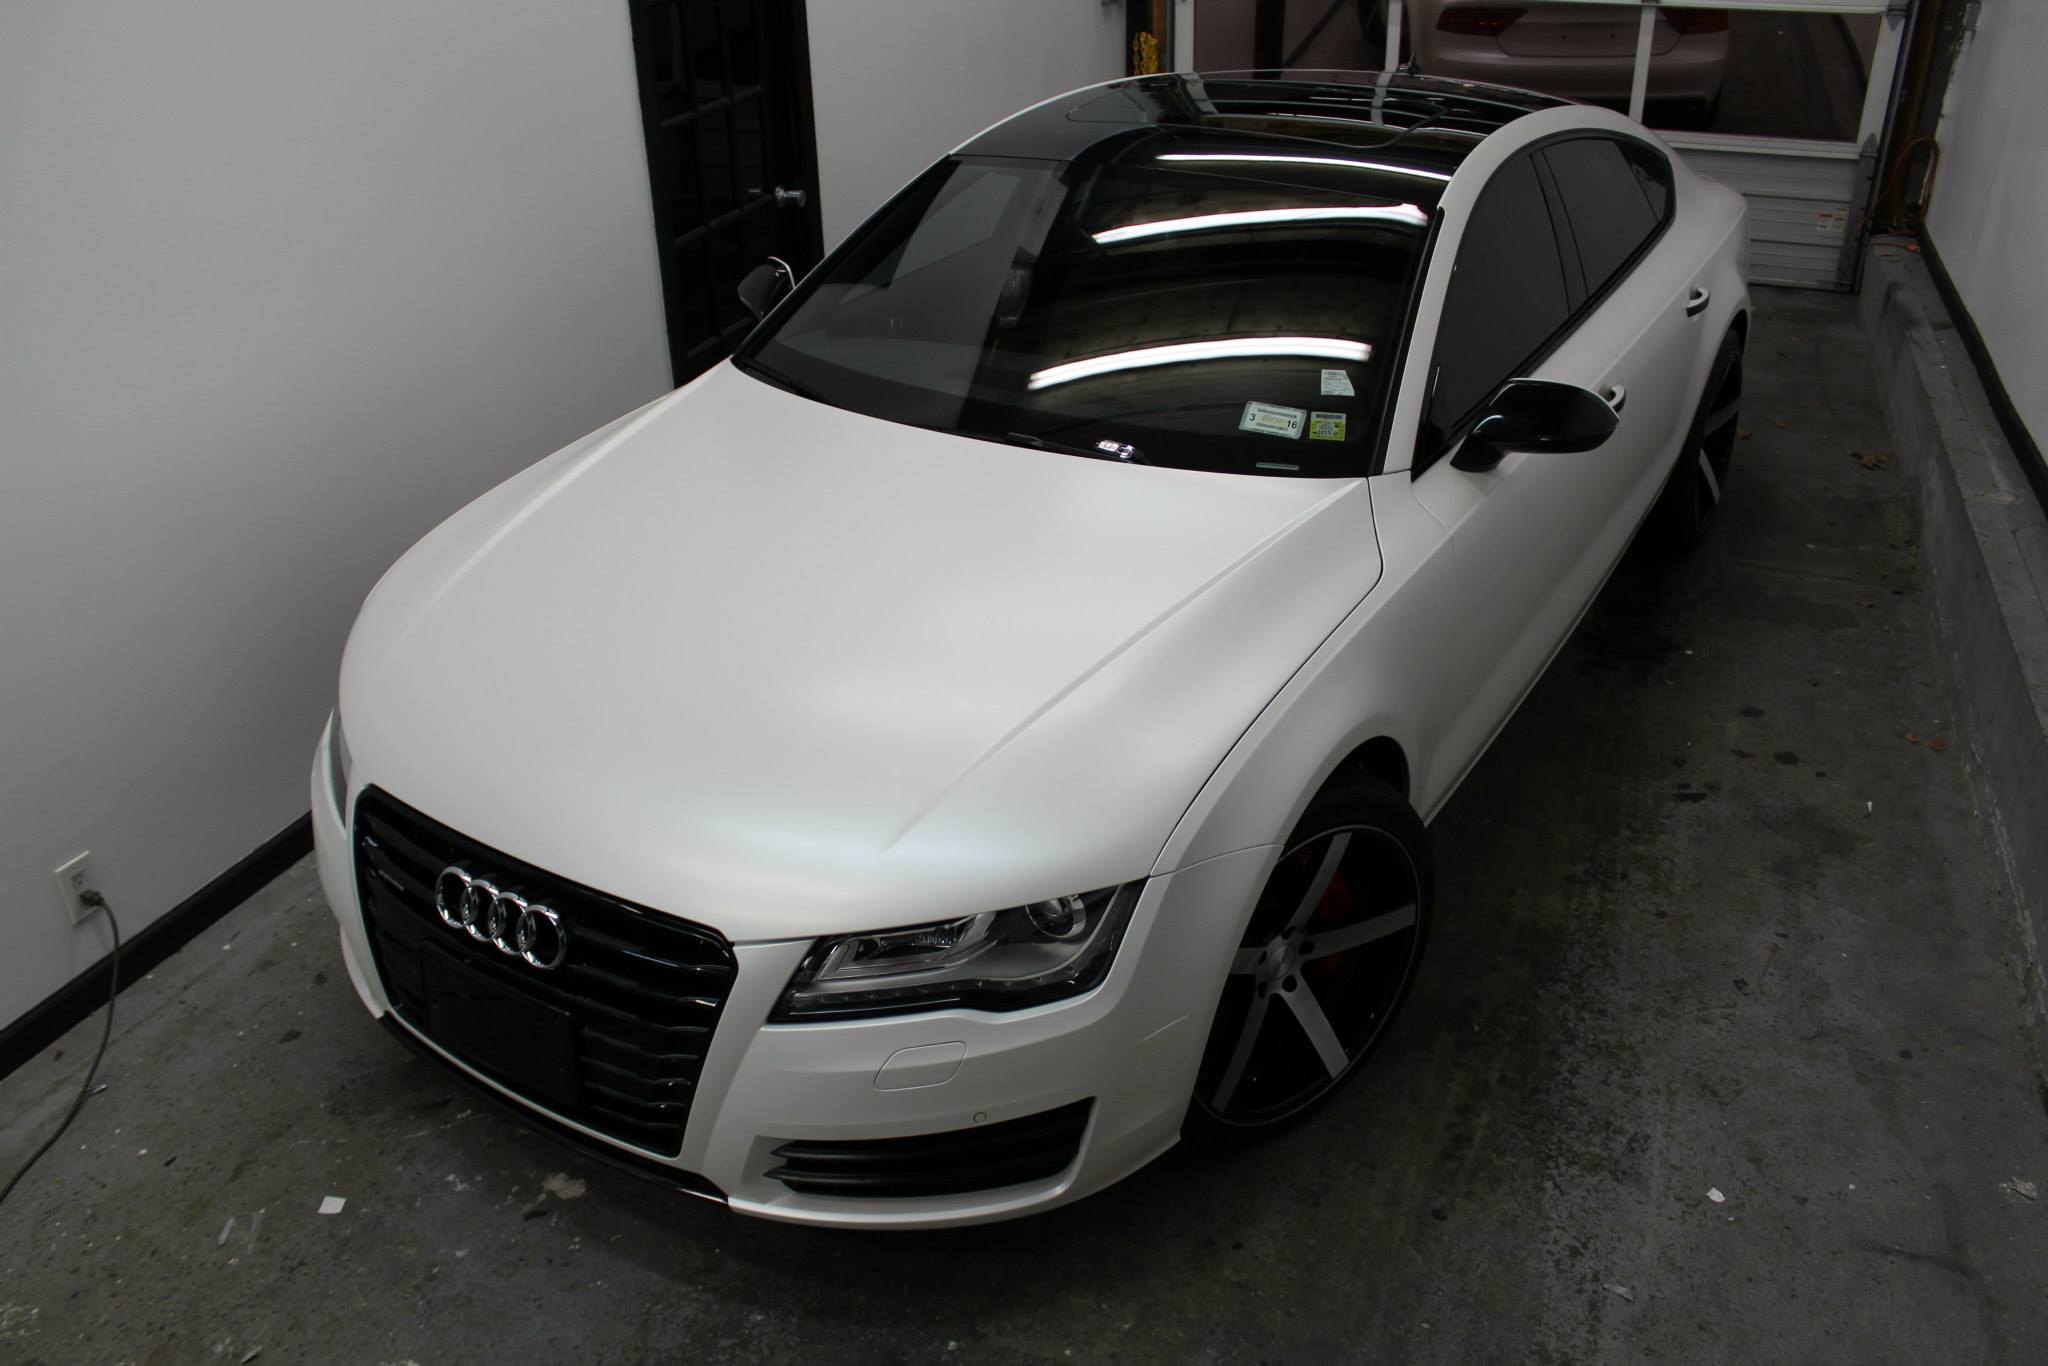 Aftermarket Side Mirrors on White Audi A7 - Photo by ONEighty NYC